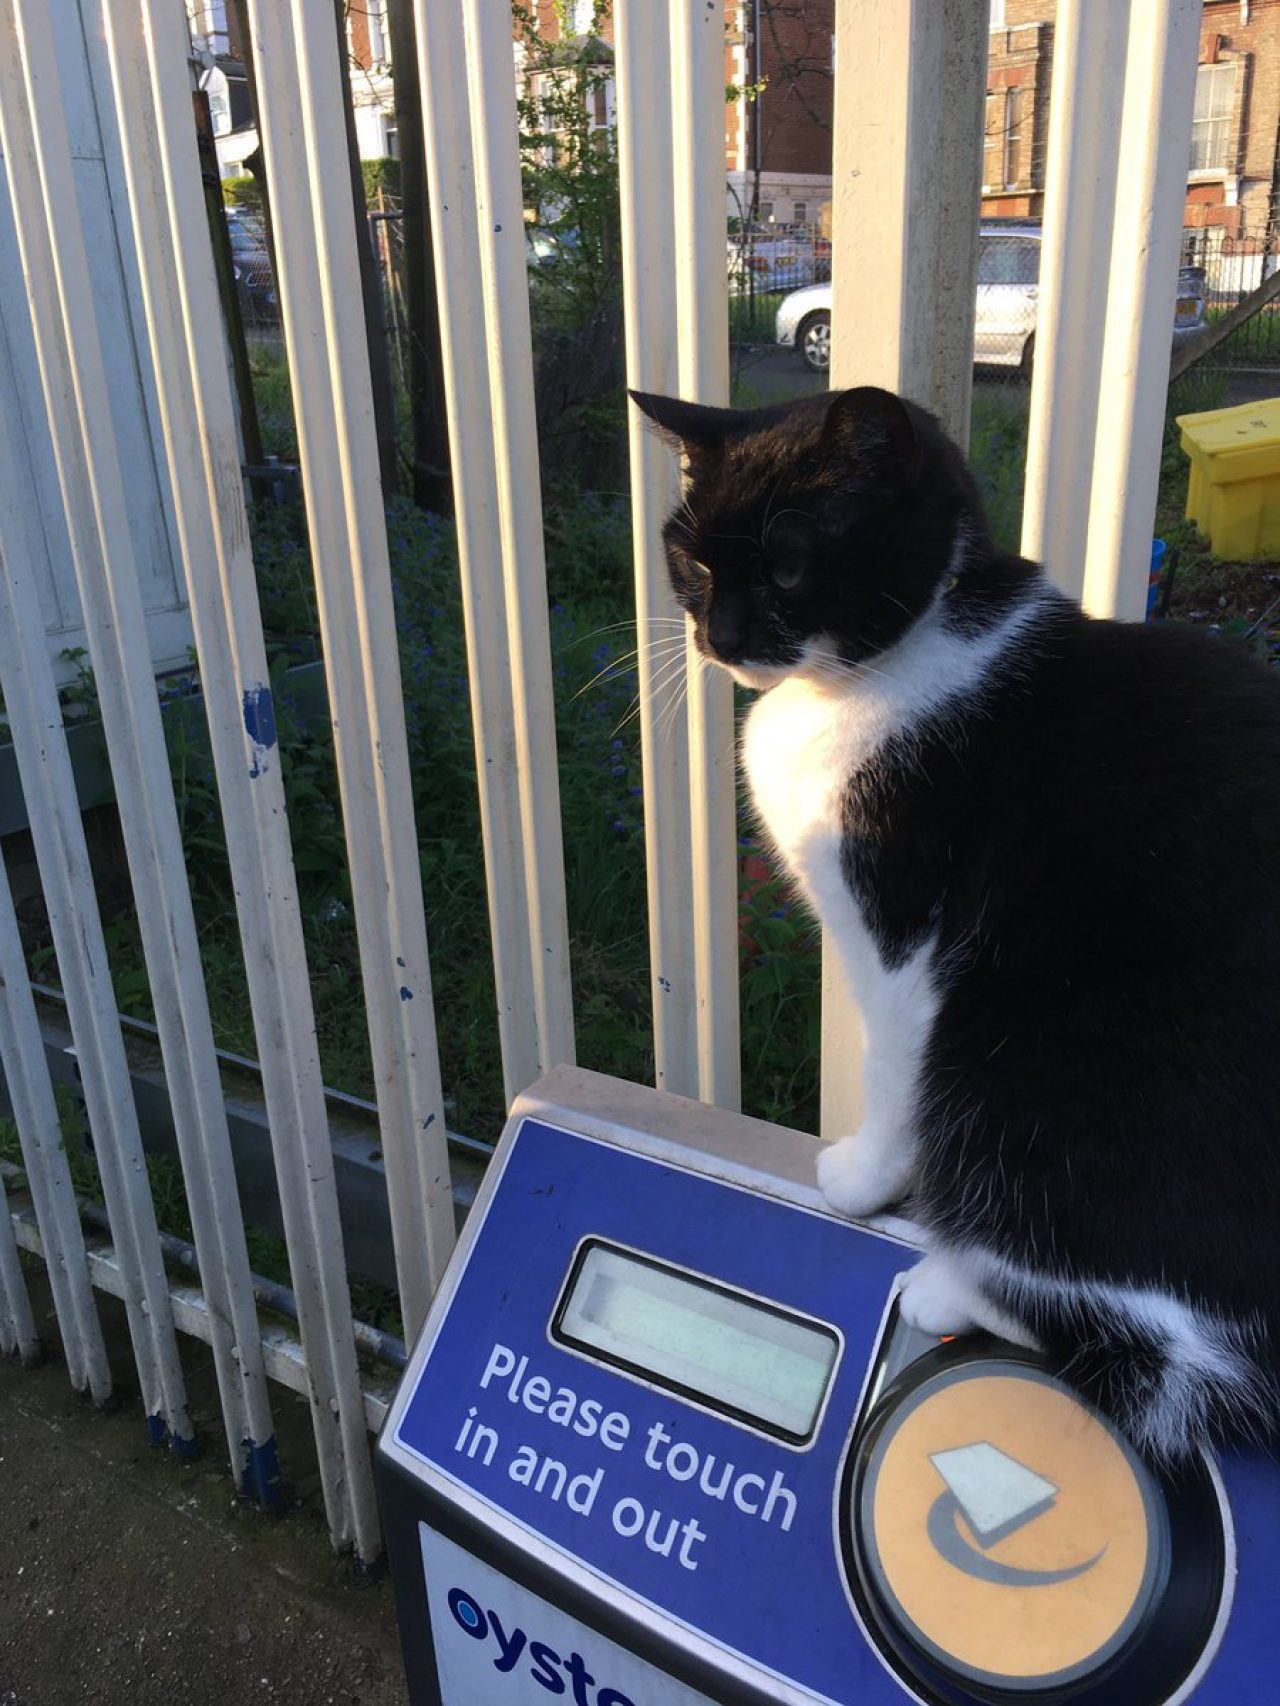 Meowing Hello To Passing Travelers Is This Cat's Favorite Pastime